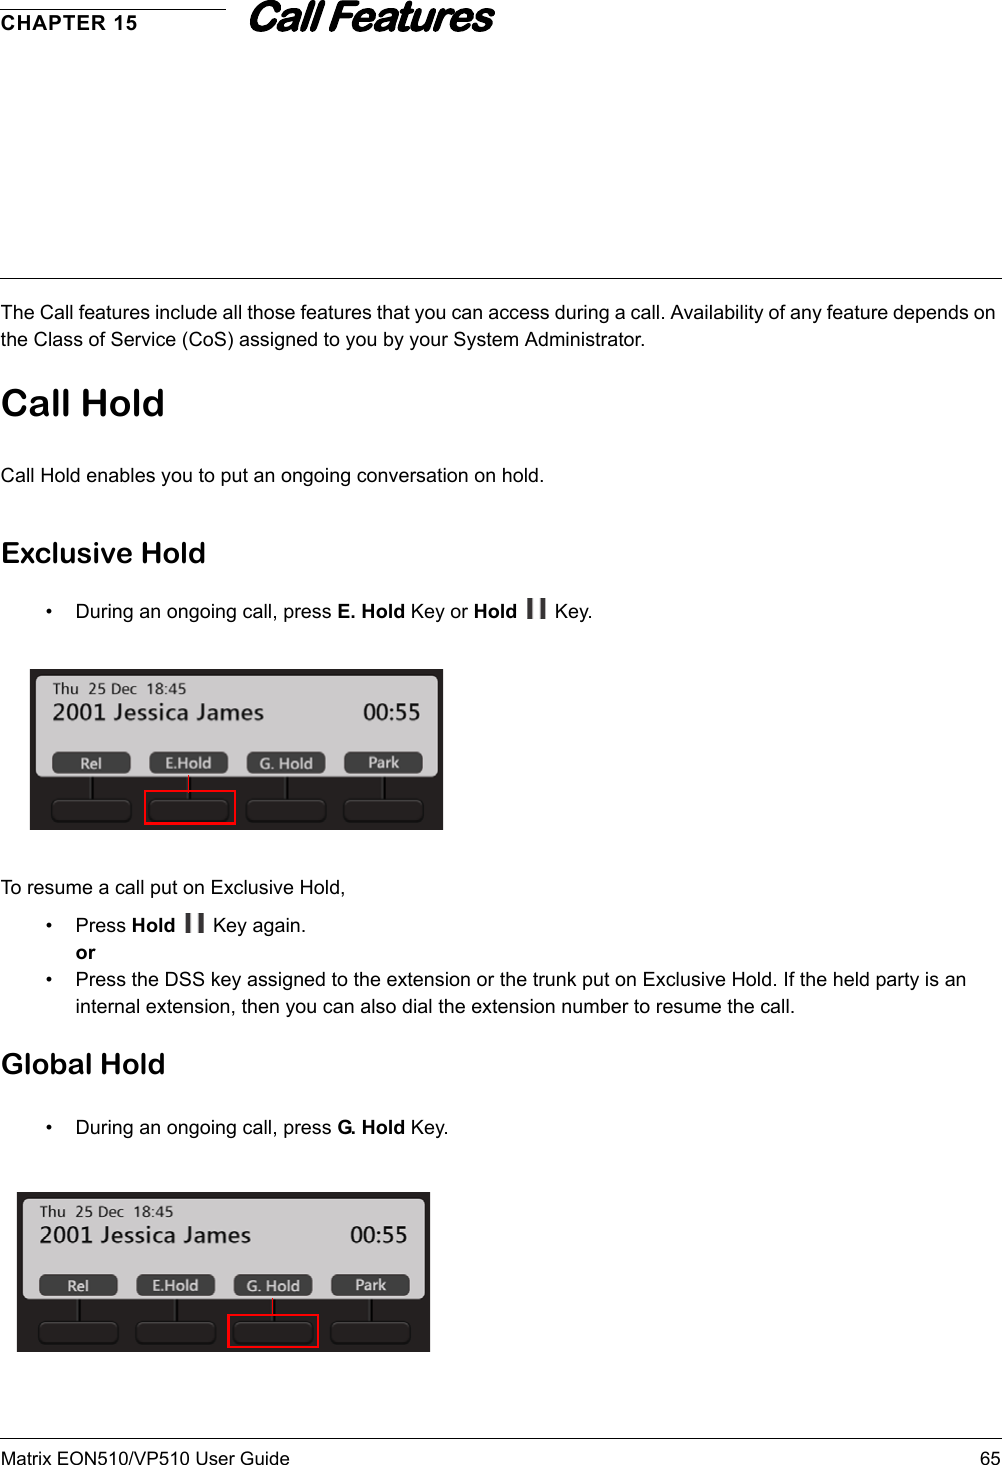 Matrix EON510/VP510 User Guide 65CHAPTER 15Call Features The Call features include all those features that you can access during a call. Availability of any feature depends on the Class of Service (CoS) assigned to you by your System Administrator.Call HoldCall Hold enables you to put an ongoing conversation on hold.Exclusive Hold• During an ongoing call, press E. Hold Key or Hold  Key.To resume a call put on Exclusive Hold,• Press Hold   Key again.or• Press the DSS key assigned to the extension or the trunk put on Exclusive Hold. If the held party is an internal extension, then you can also dial the extension number to resume the call.Global Hold• During an ongoing call, press G. H old  Key.